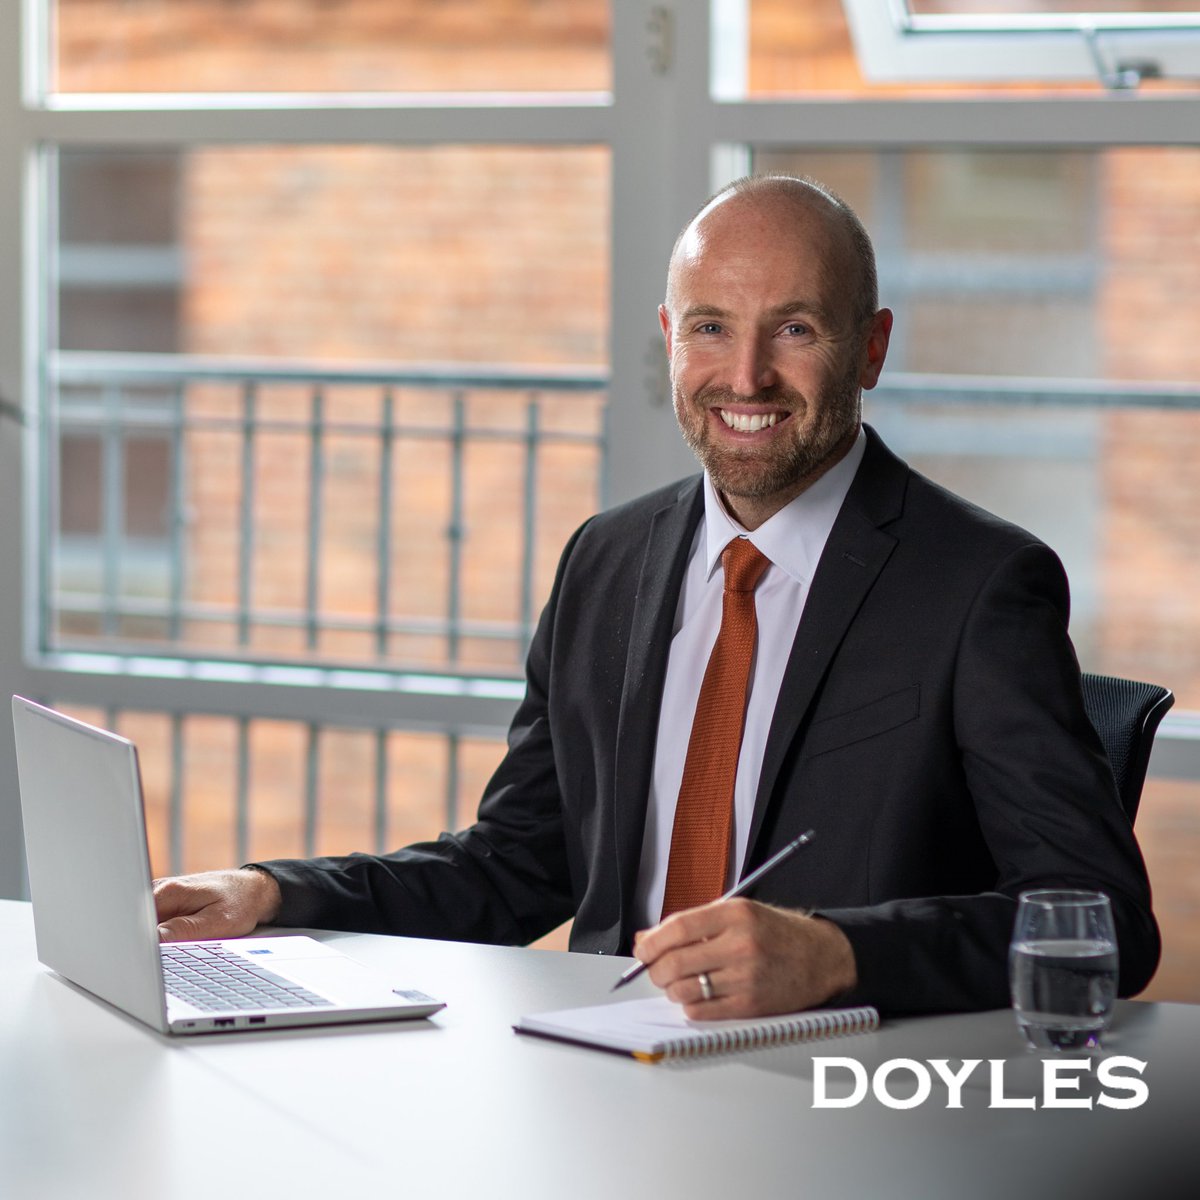 We’re delighted to announce that both Amanda McAlister and Jason Stanley have been recommended in the @DoylesGuide 2024 listing of Leading Manchester Family and Divorce Lawyers. Congratulations both - thoroughly deserved! #familylaw #divorcelaw #doylesguide #manchester